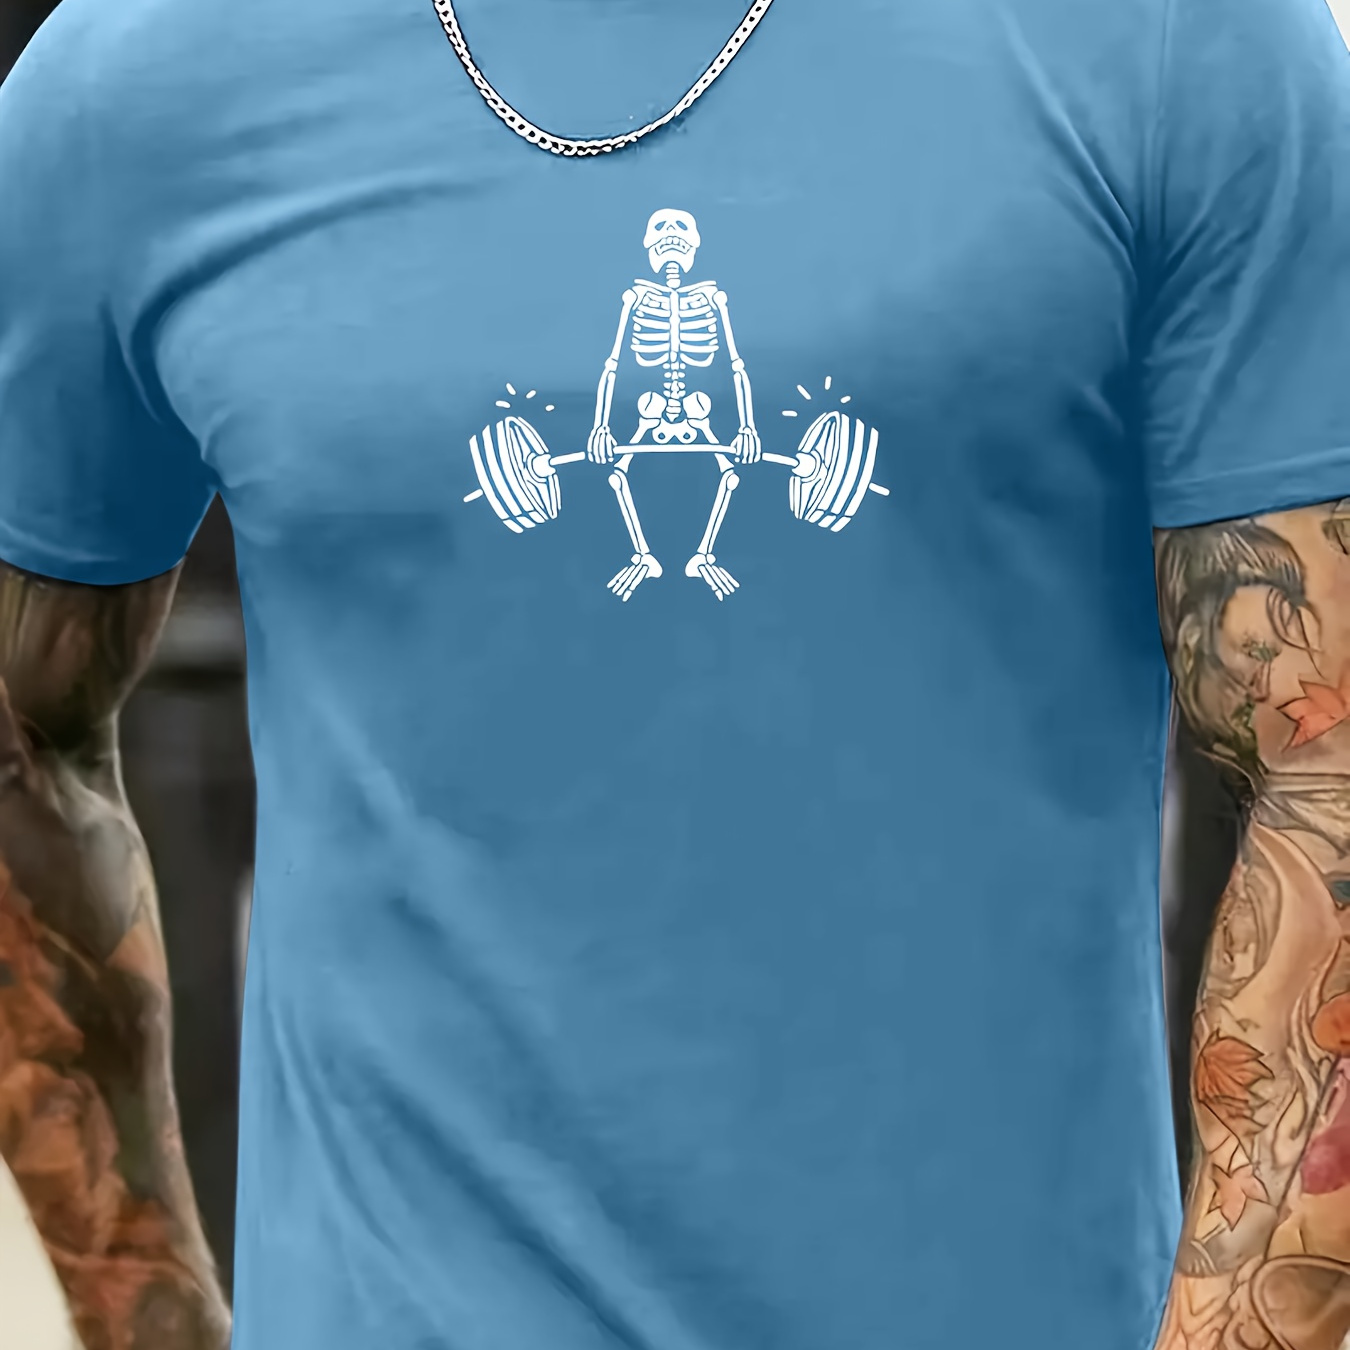 

Skeleton Weightlifting Print T Shirt, Tees For Men, Casual Short Sleeve T-shirt For Summer